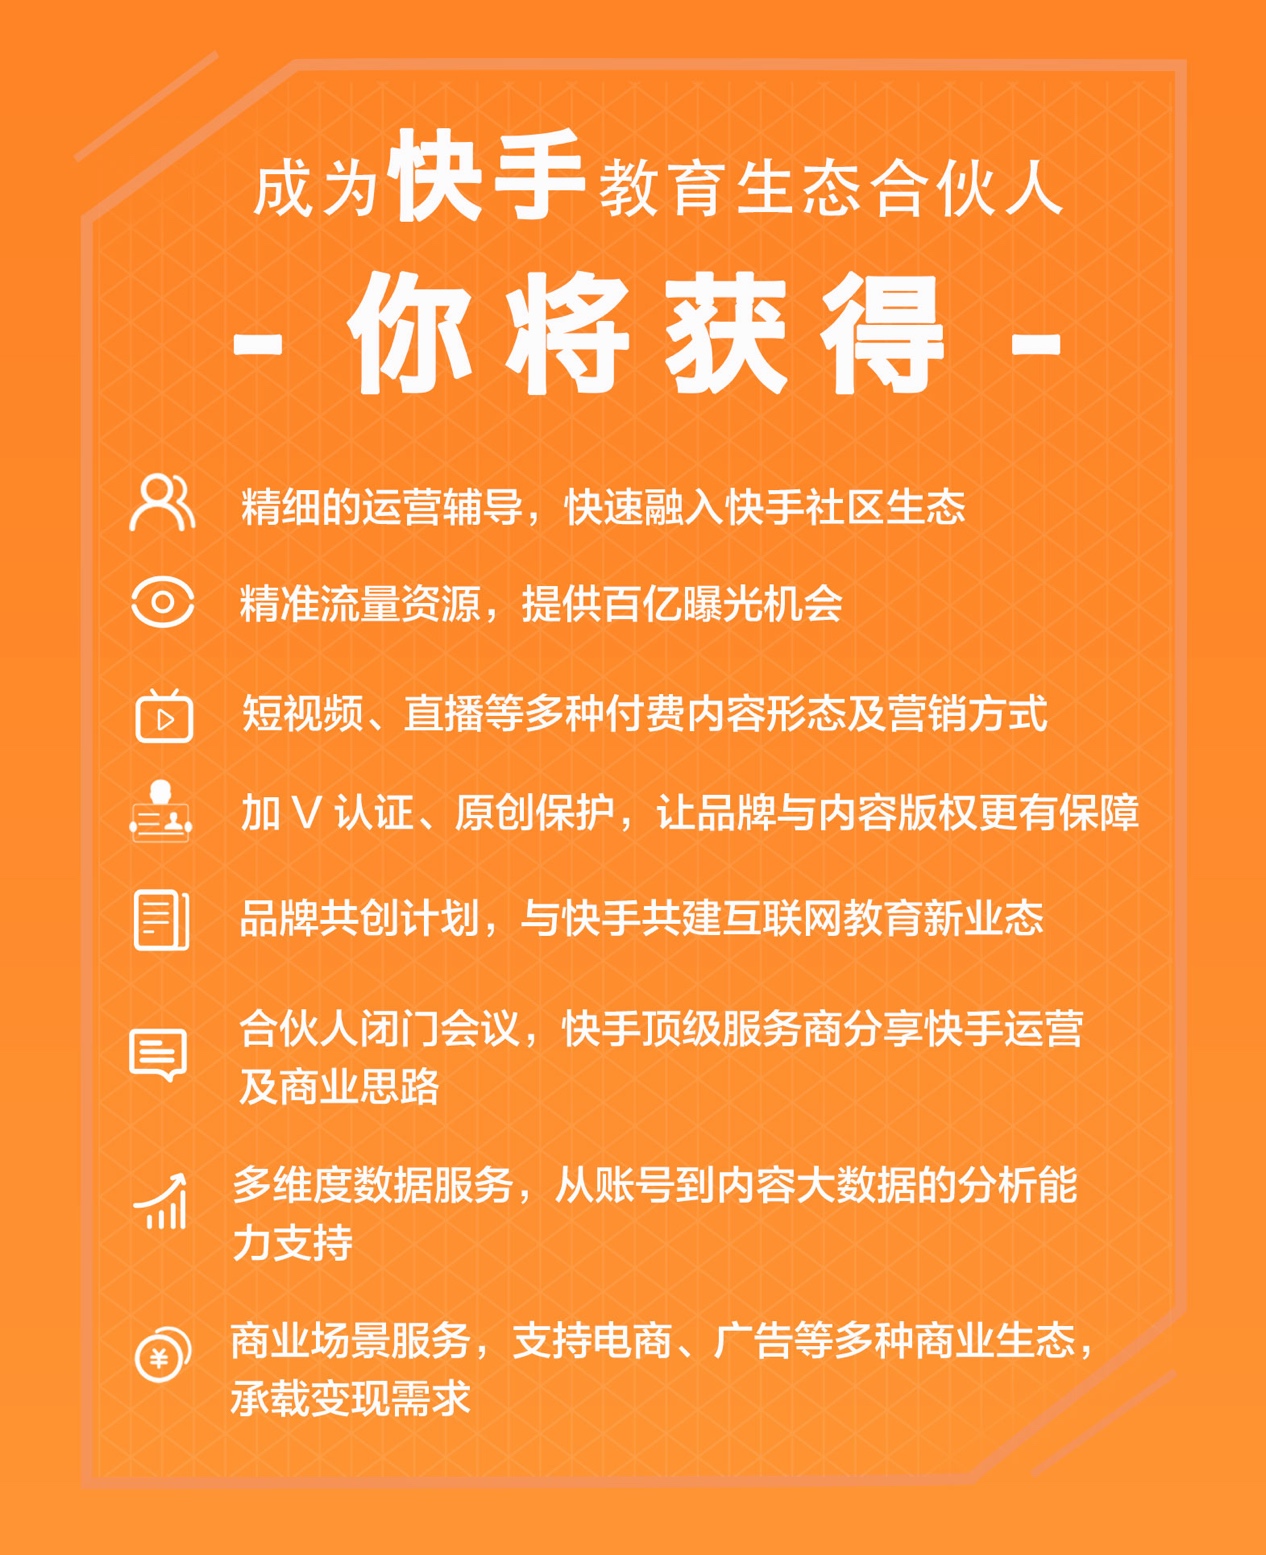 ../Library/Containers/com.tencent.WeWorkMac/Data/Library/Application%20Support/WXWork/Data/1688854044392860/Cache/Image/2019-10/教育生态-你将获得(1).jpg